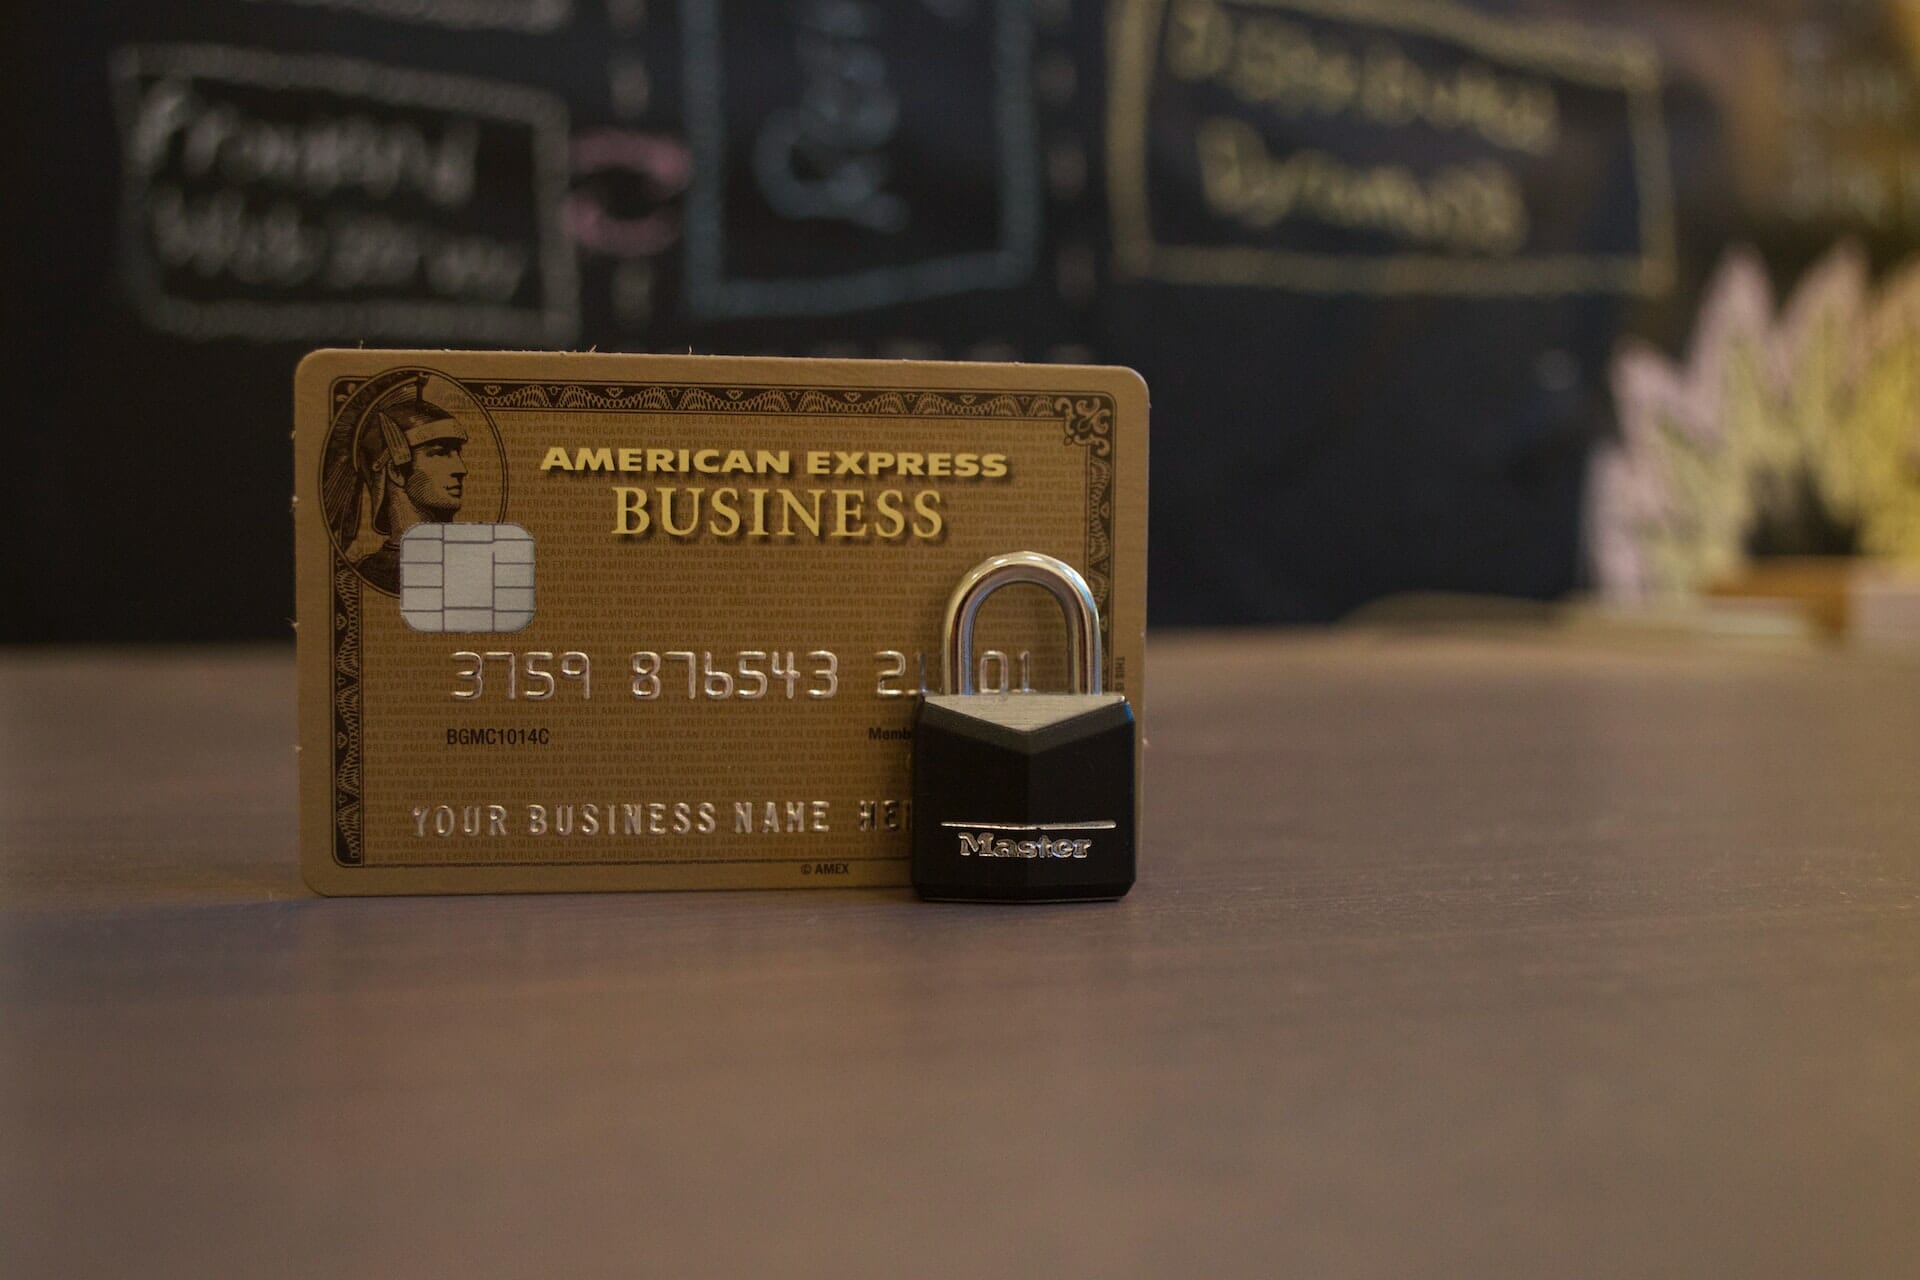 American express to update travel protections change purchase benefits for premium cardholders